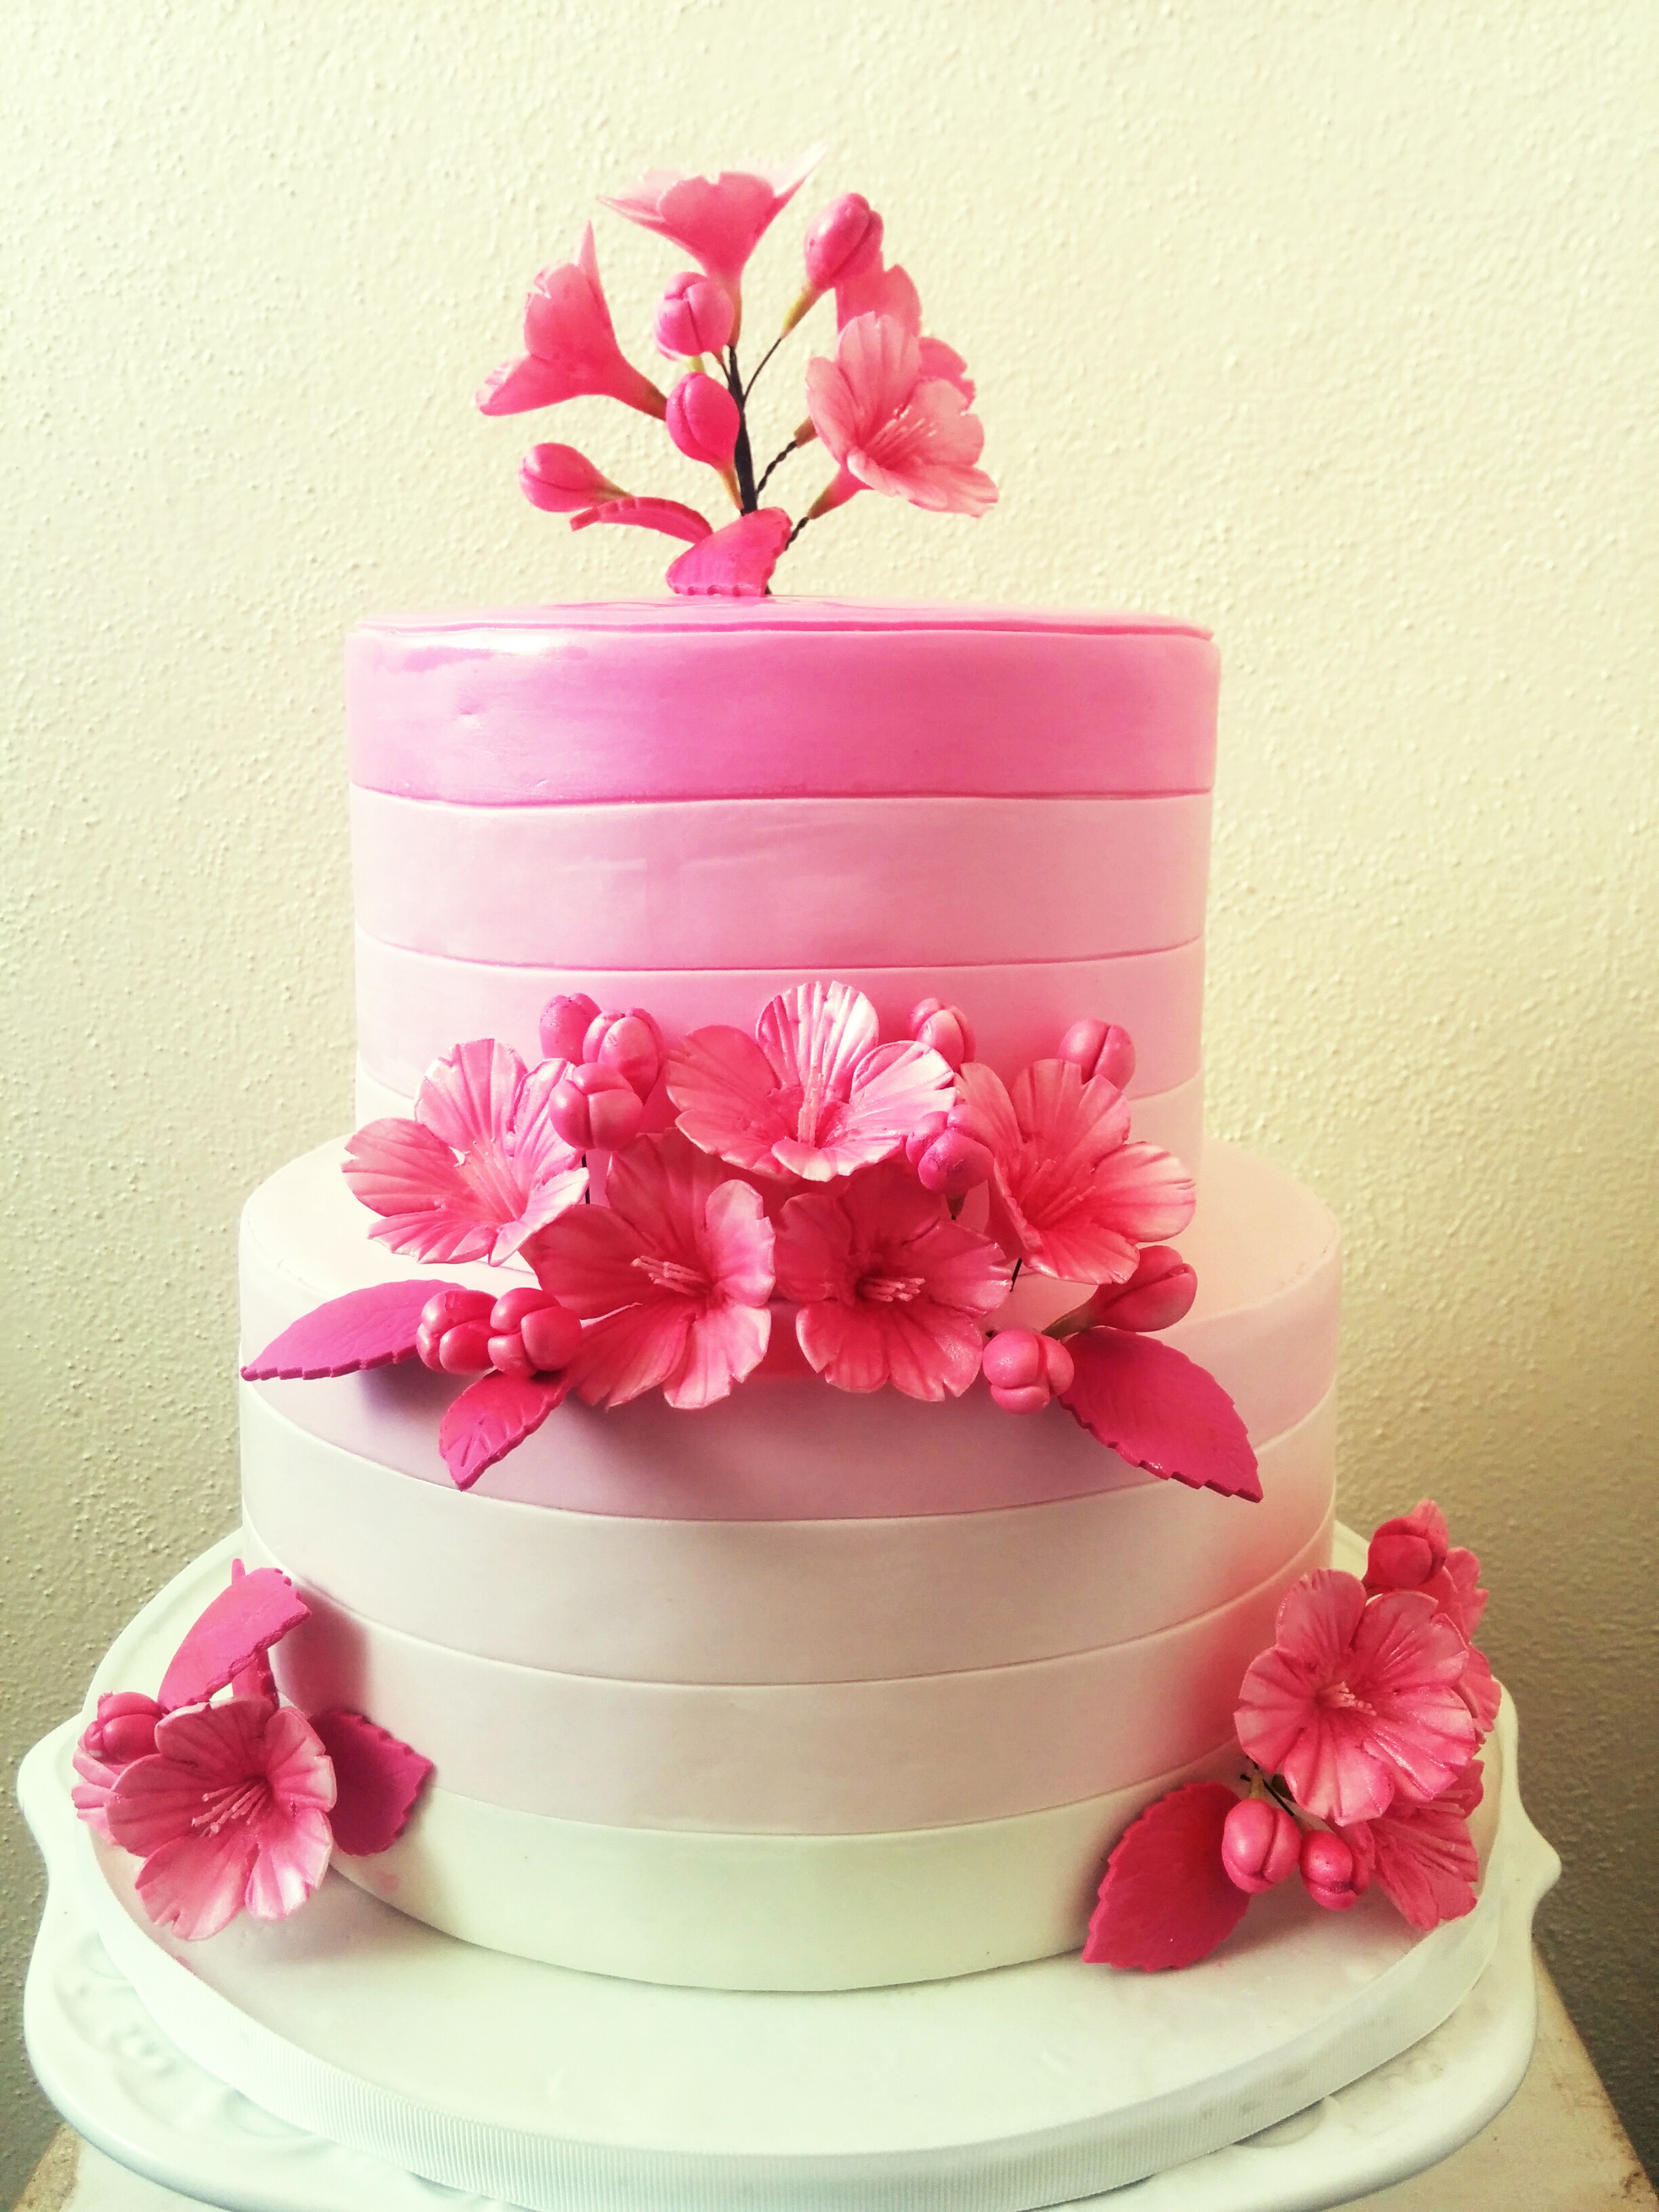 Need Dowels Two Tier Cake, Multi Layer Cake Supports